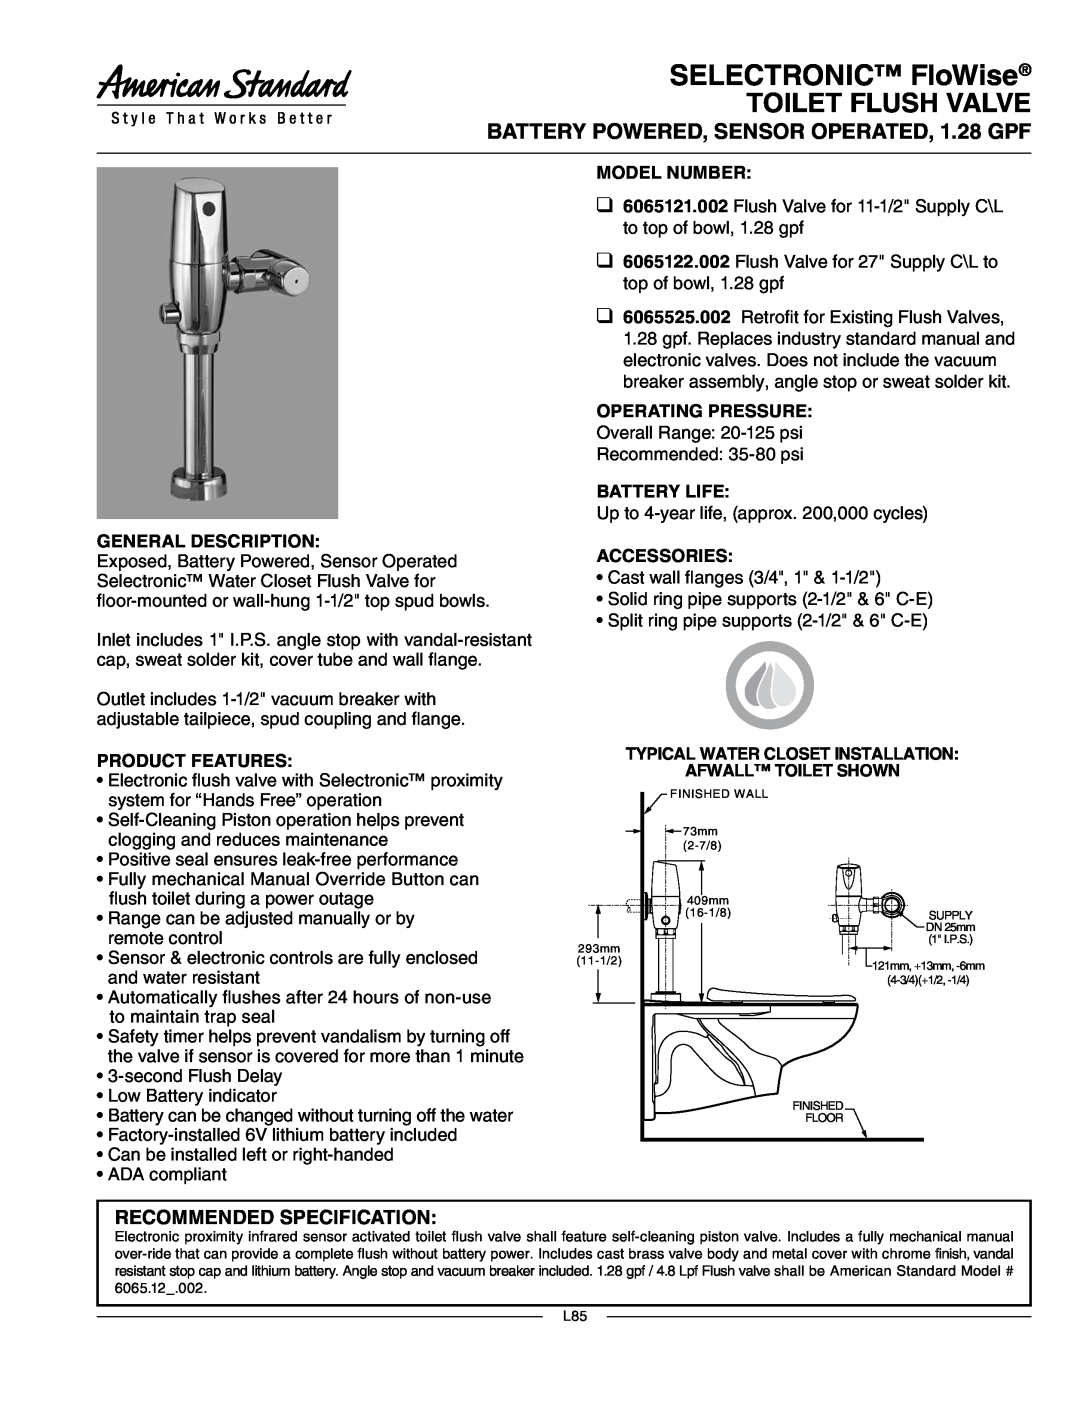 American Standard 6065121.002 manual SELECTRONIC FloWise, Toilet Flush Valve, Recommended Specification, Model Number 